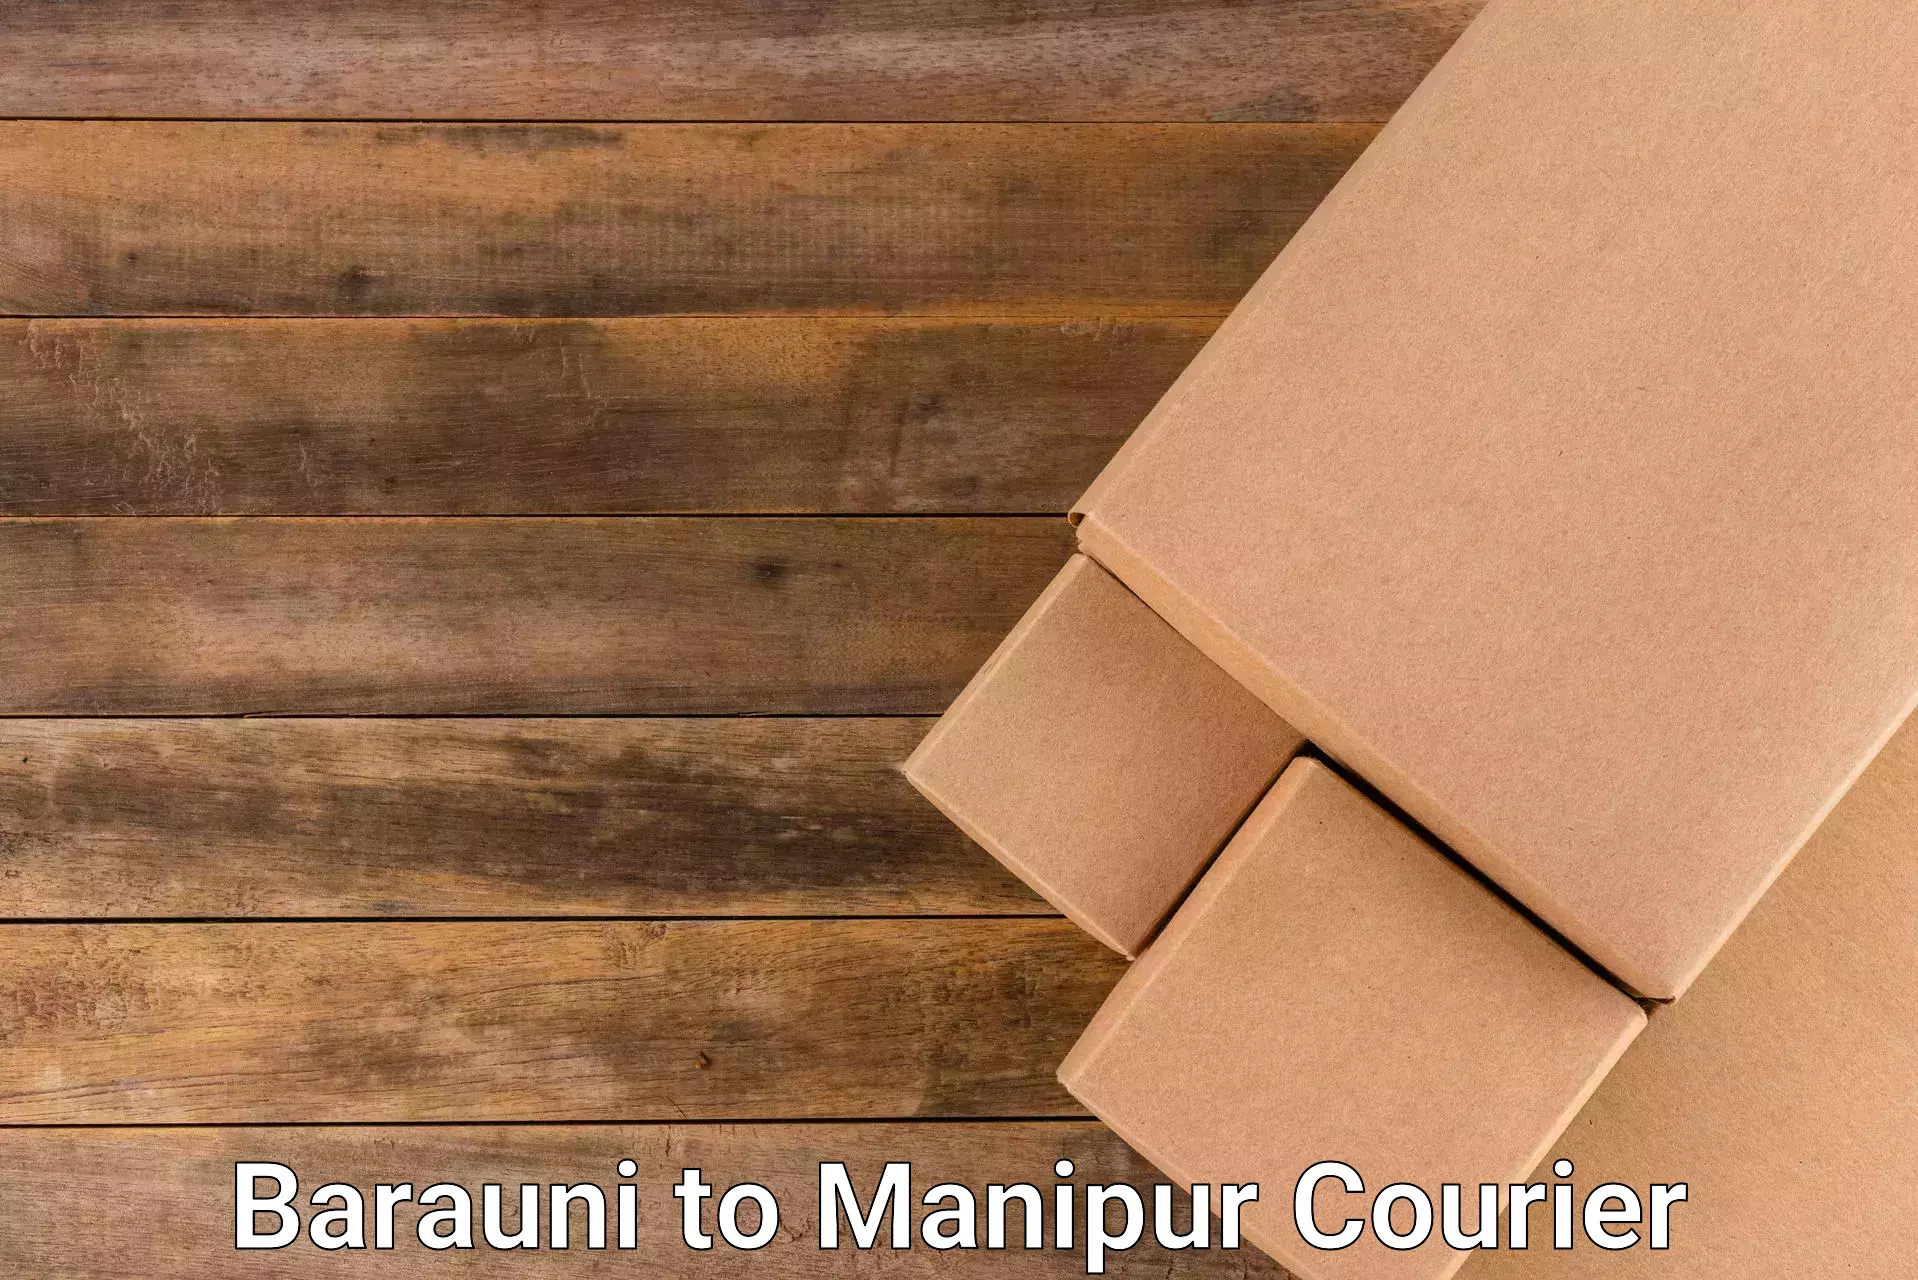 Reliable delivery network Barauni to Manipur